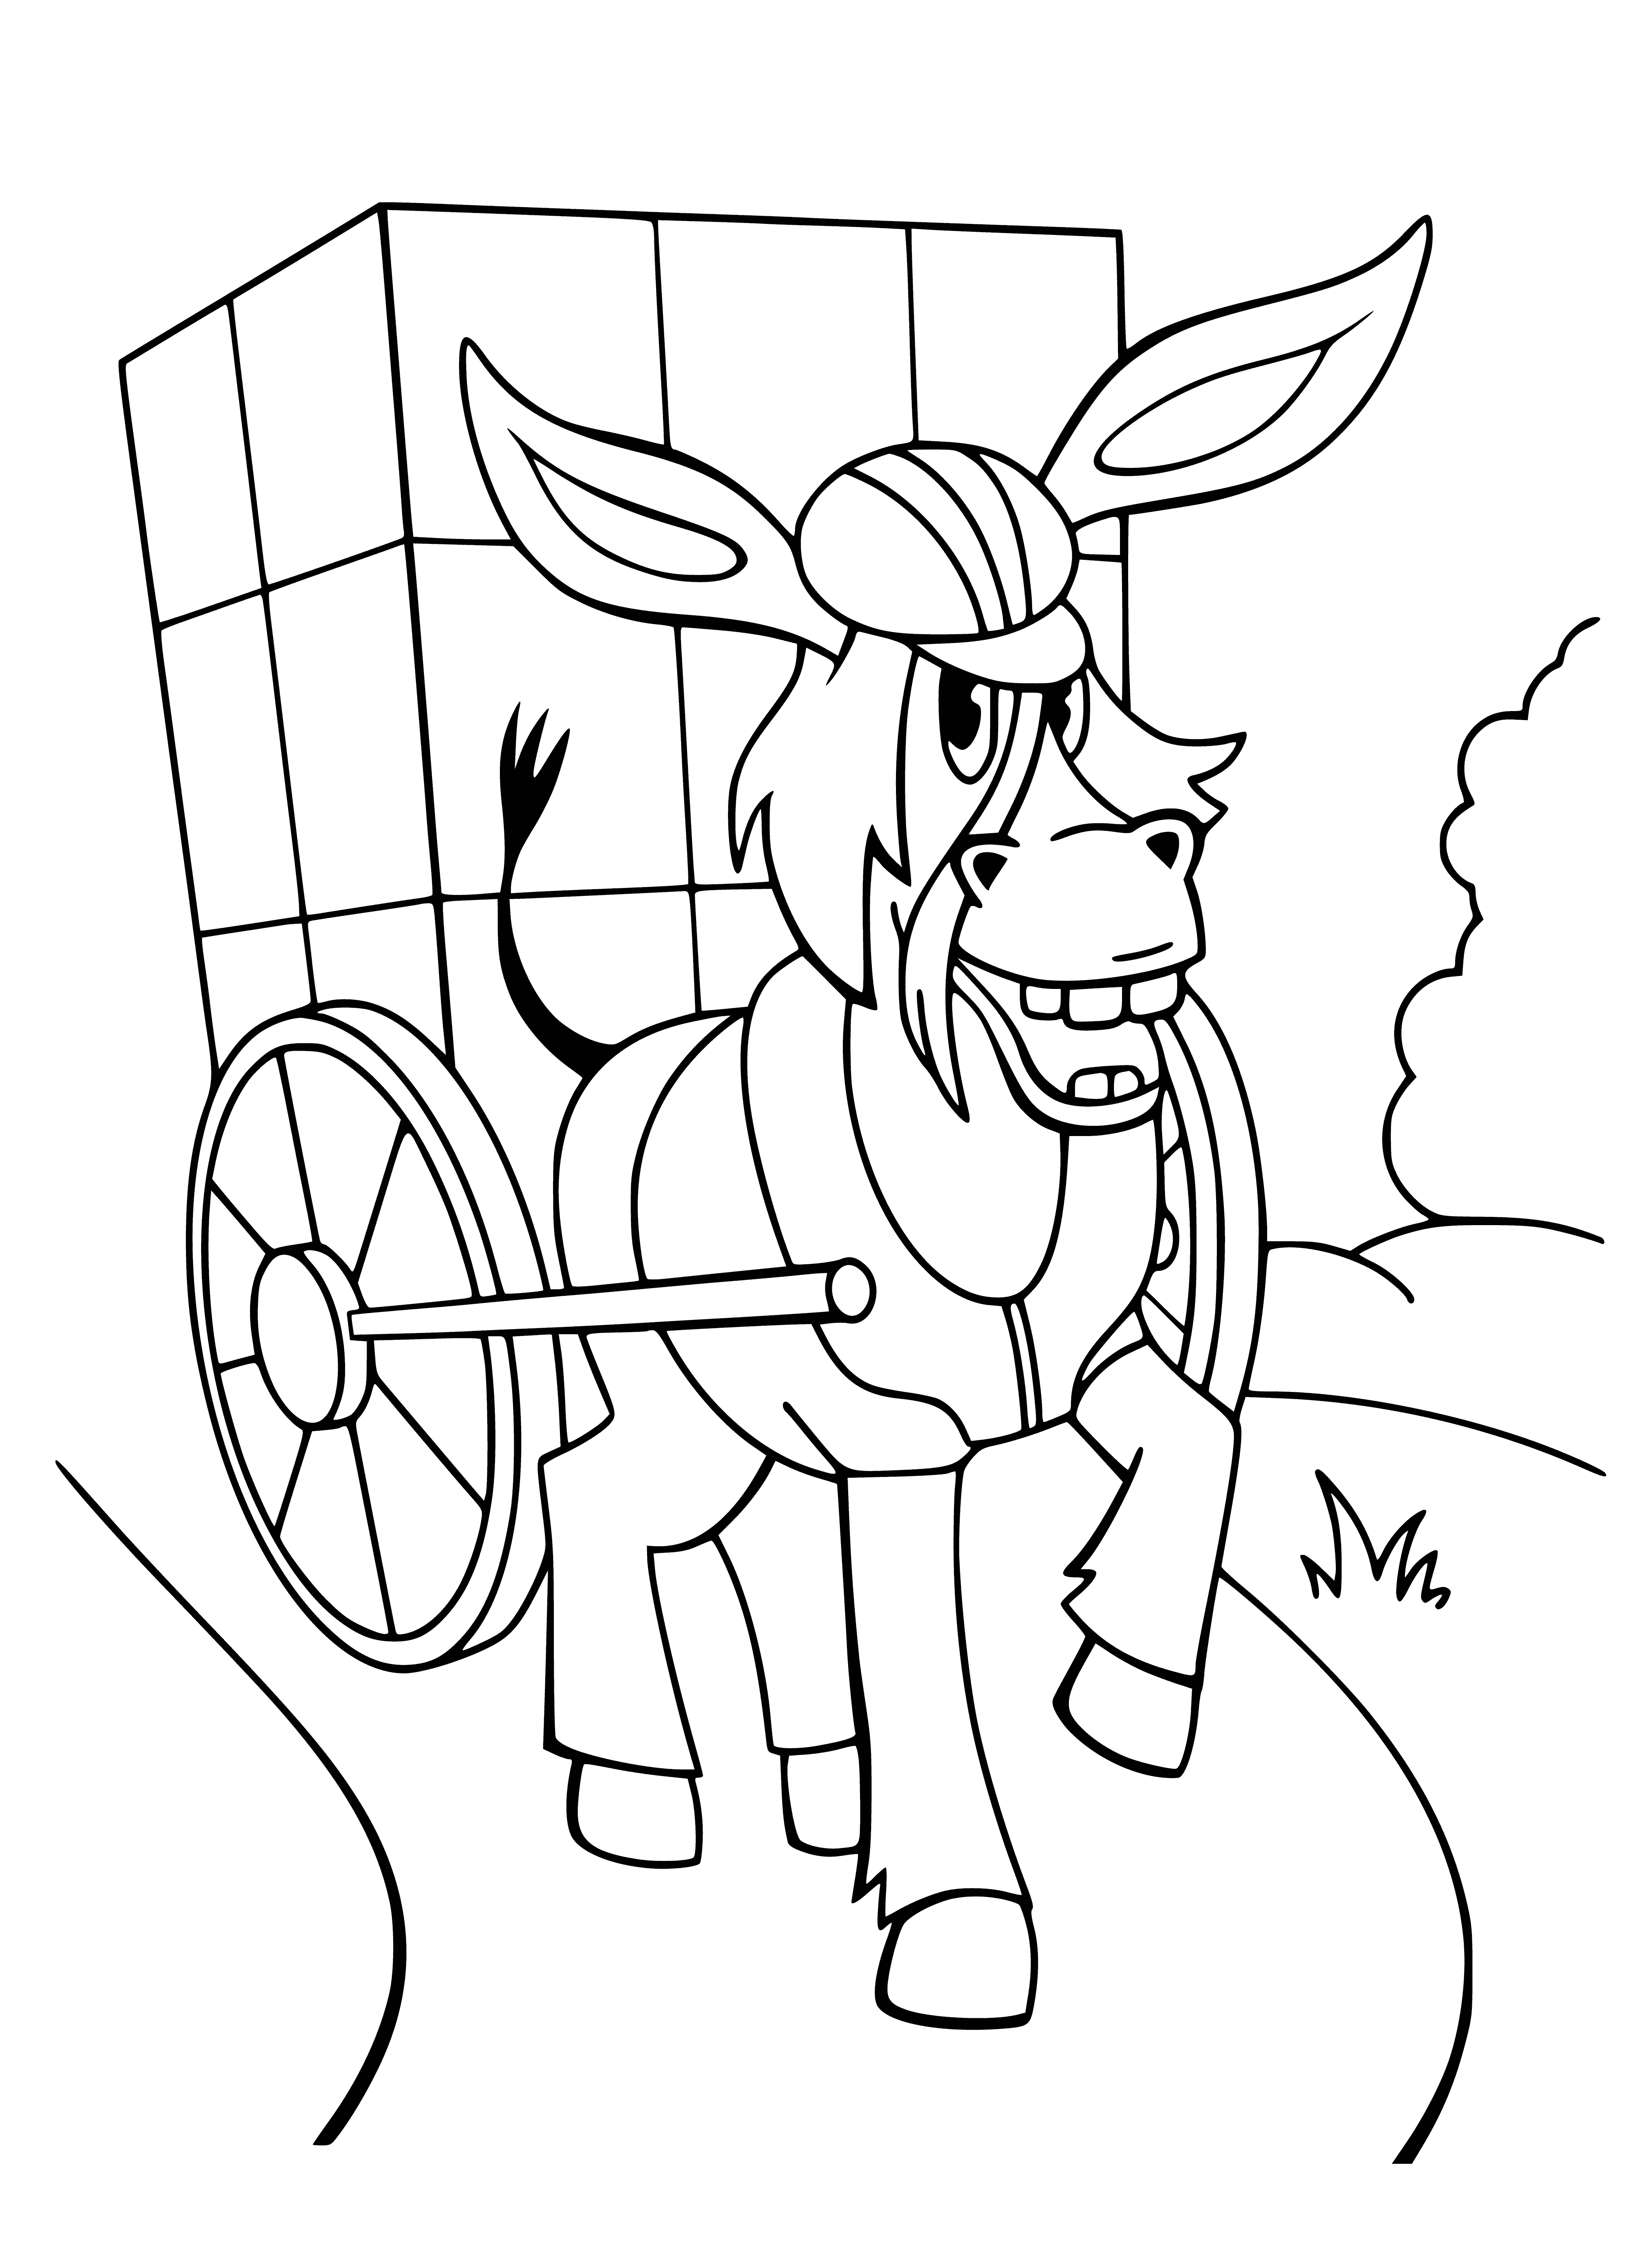 coloring page: Donkey wearing a red scarf stands in a road looking toward a town, surrounded by houses and trees.